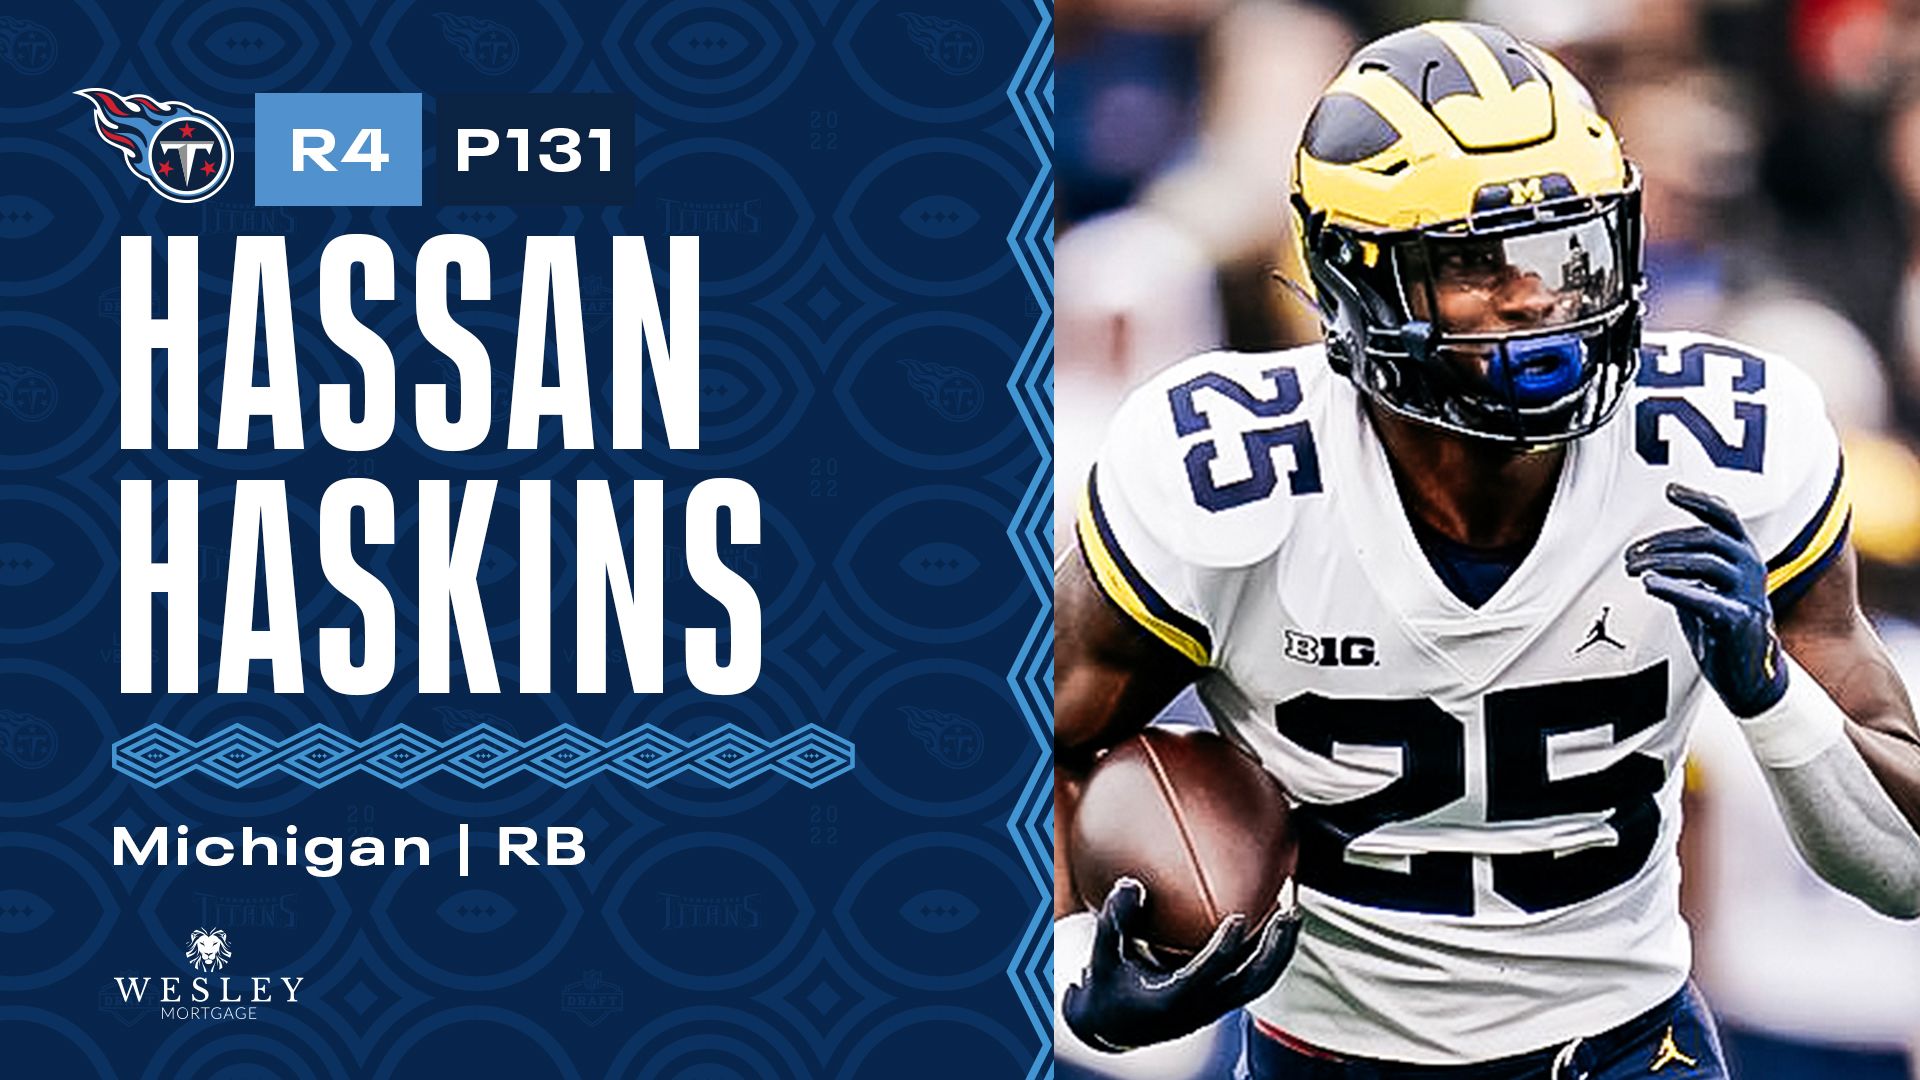 Titans Select Hassan Haskins with No. 131 Pick in 2022 Draft